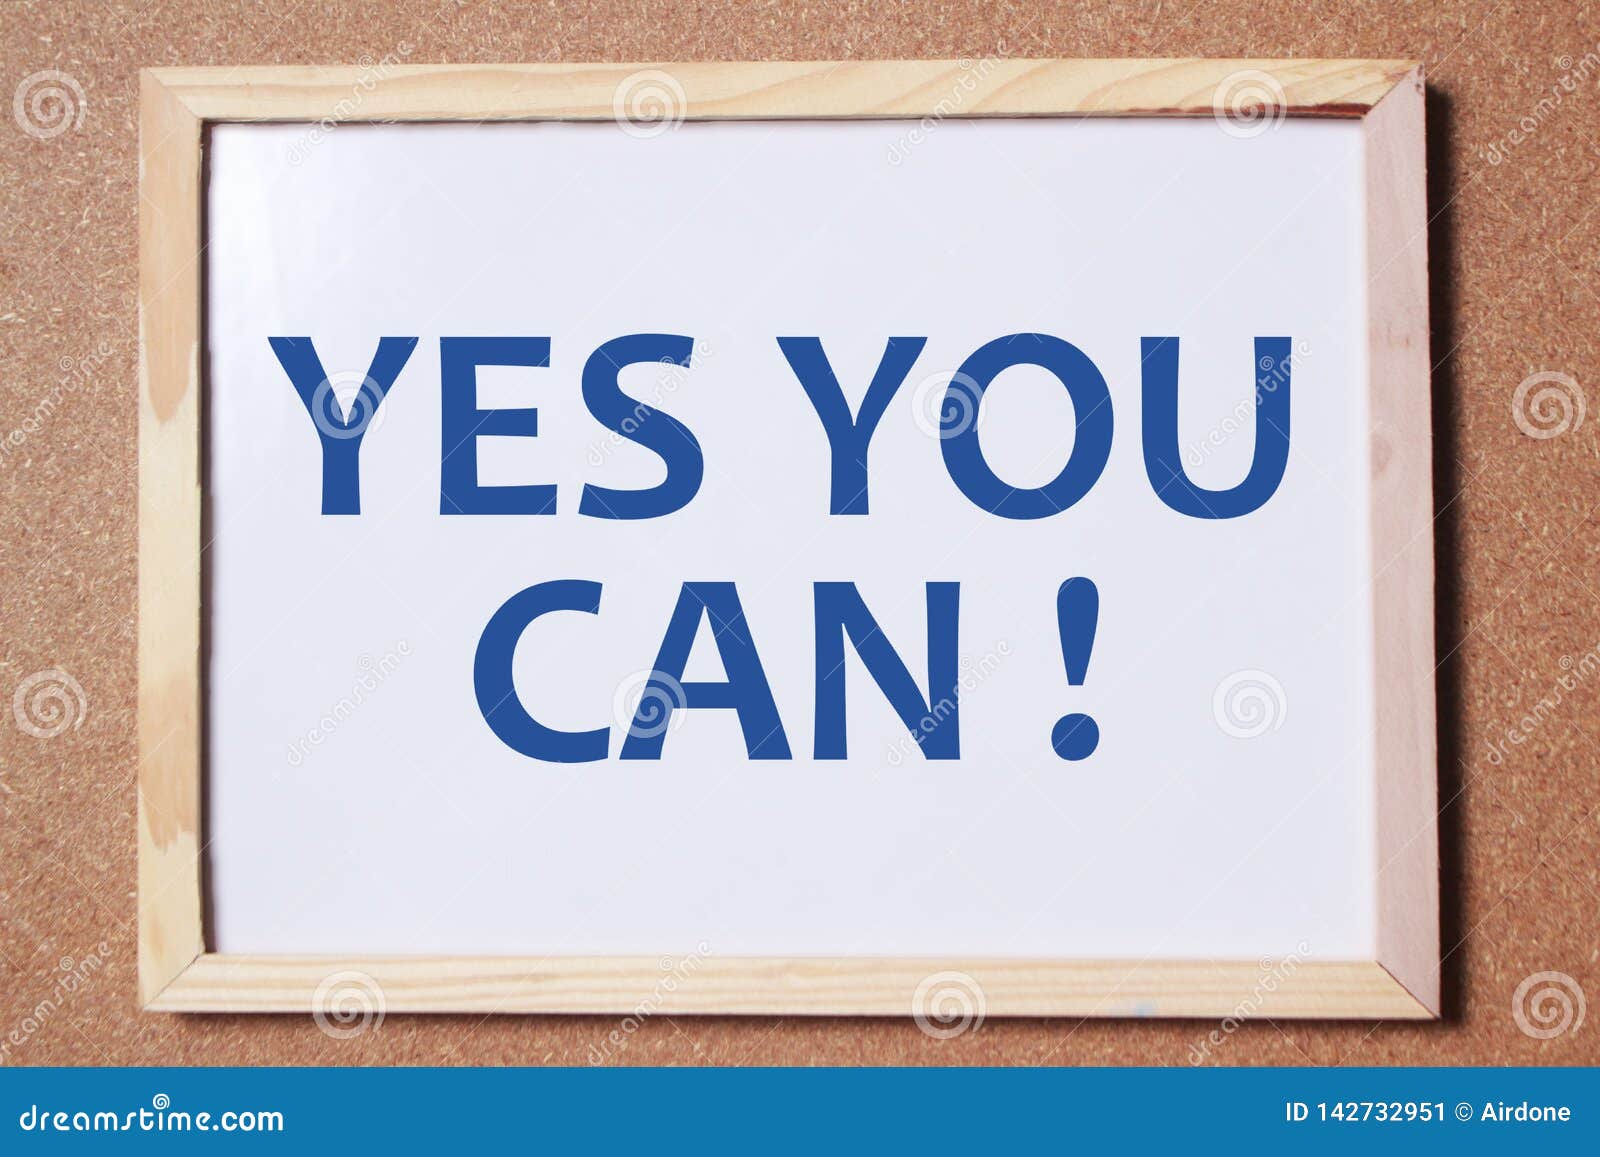 Yes You Can Motivational Words Quotes Concept Stock Image Image Of Symbol Attitude